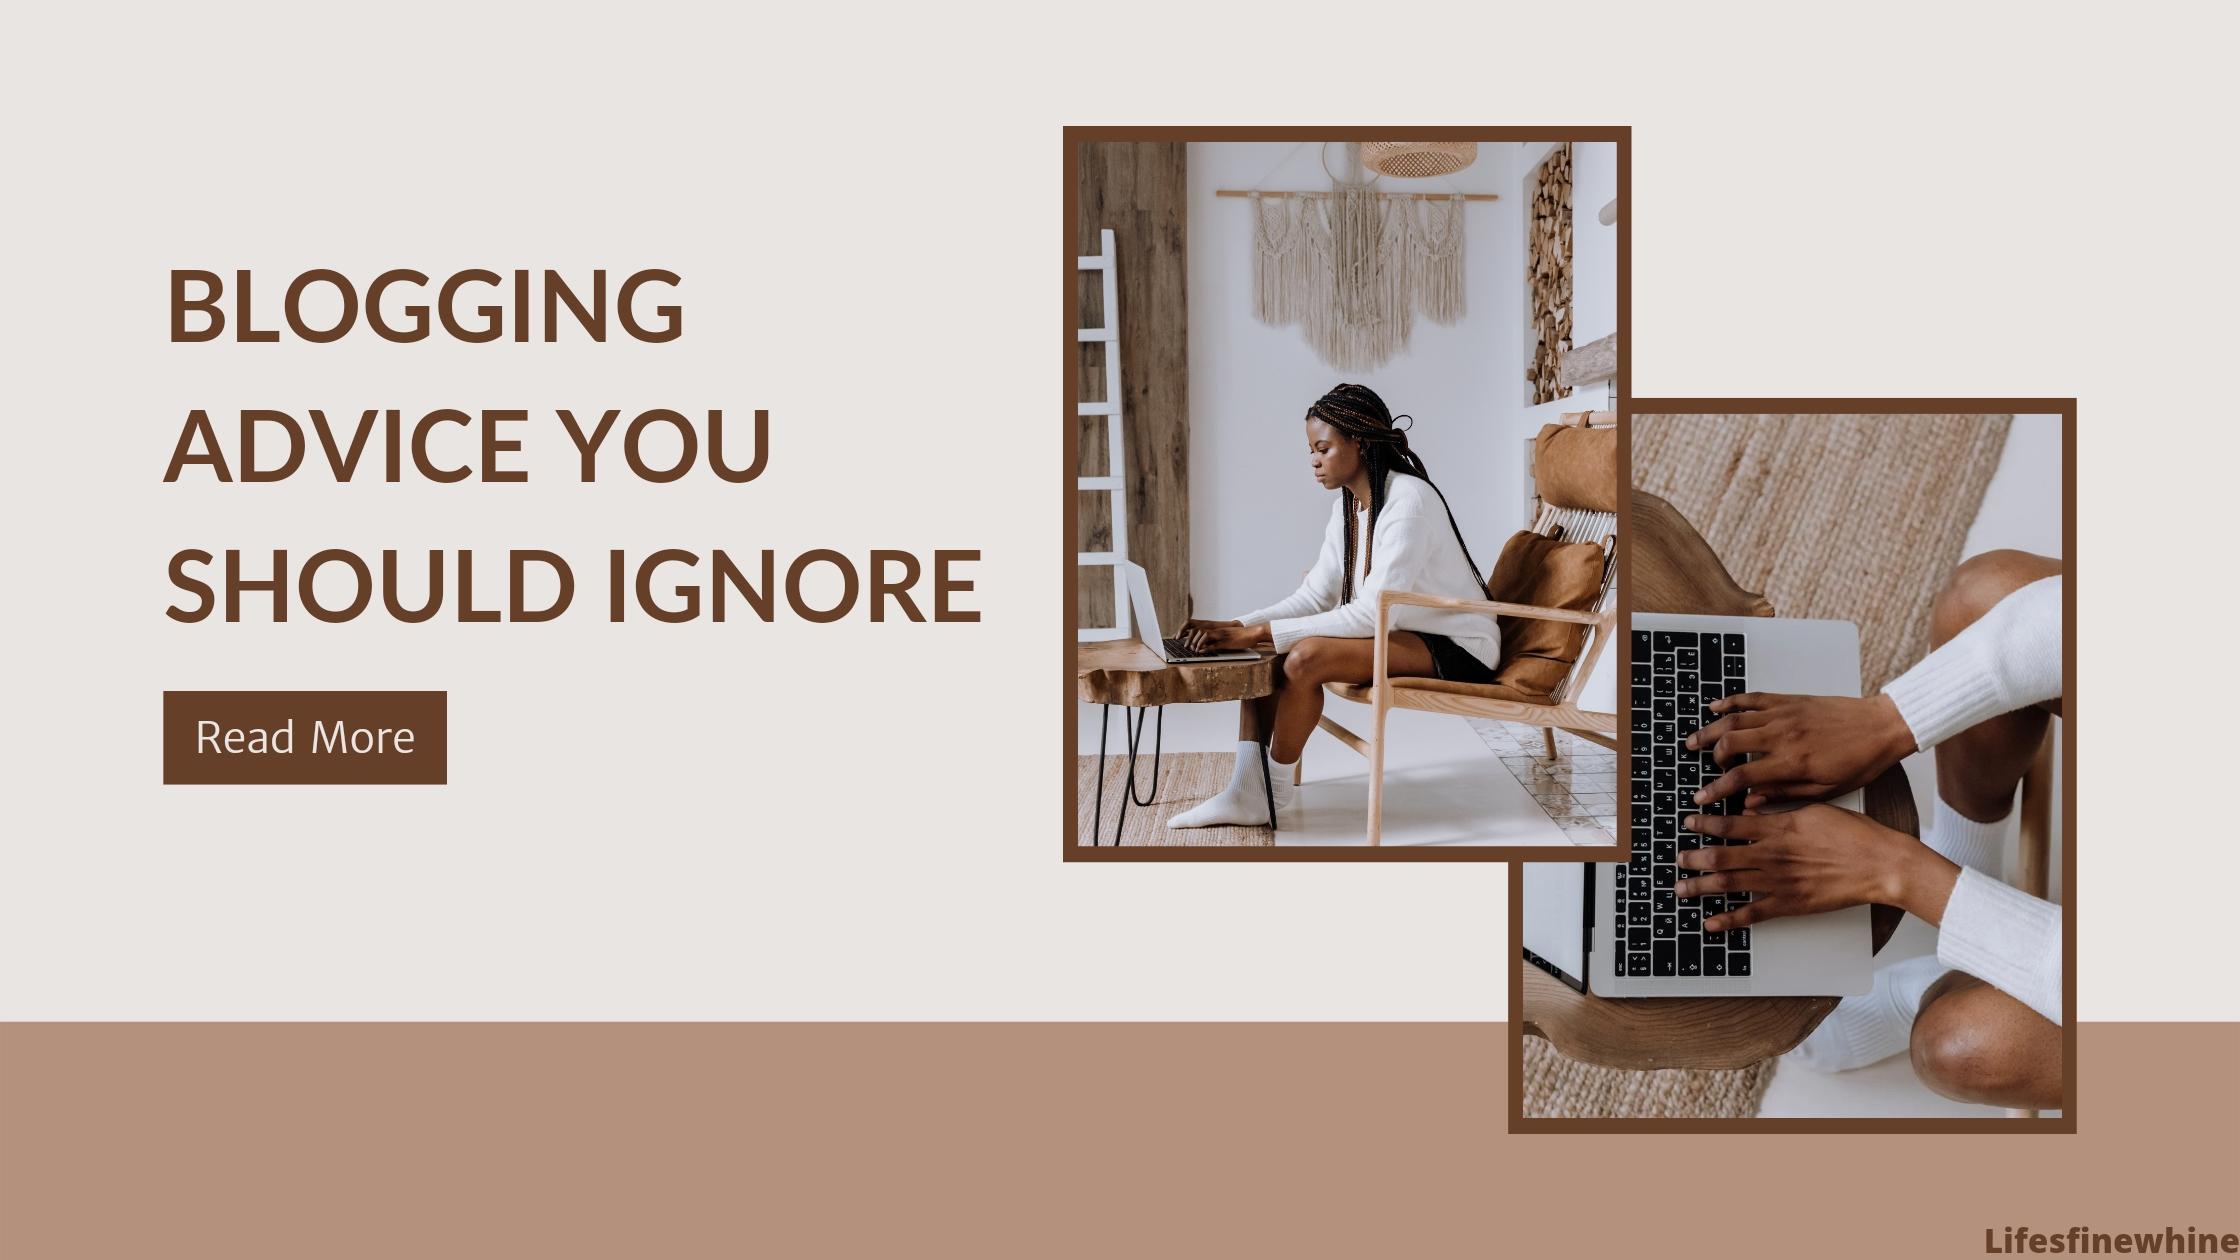 Blogging Advice You Should Ignore